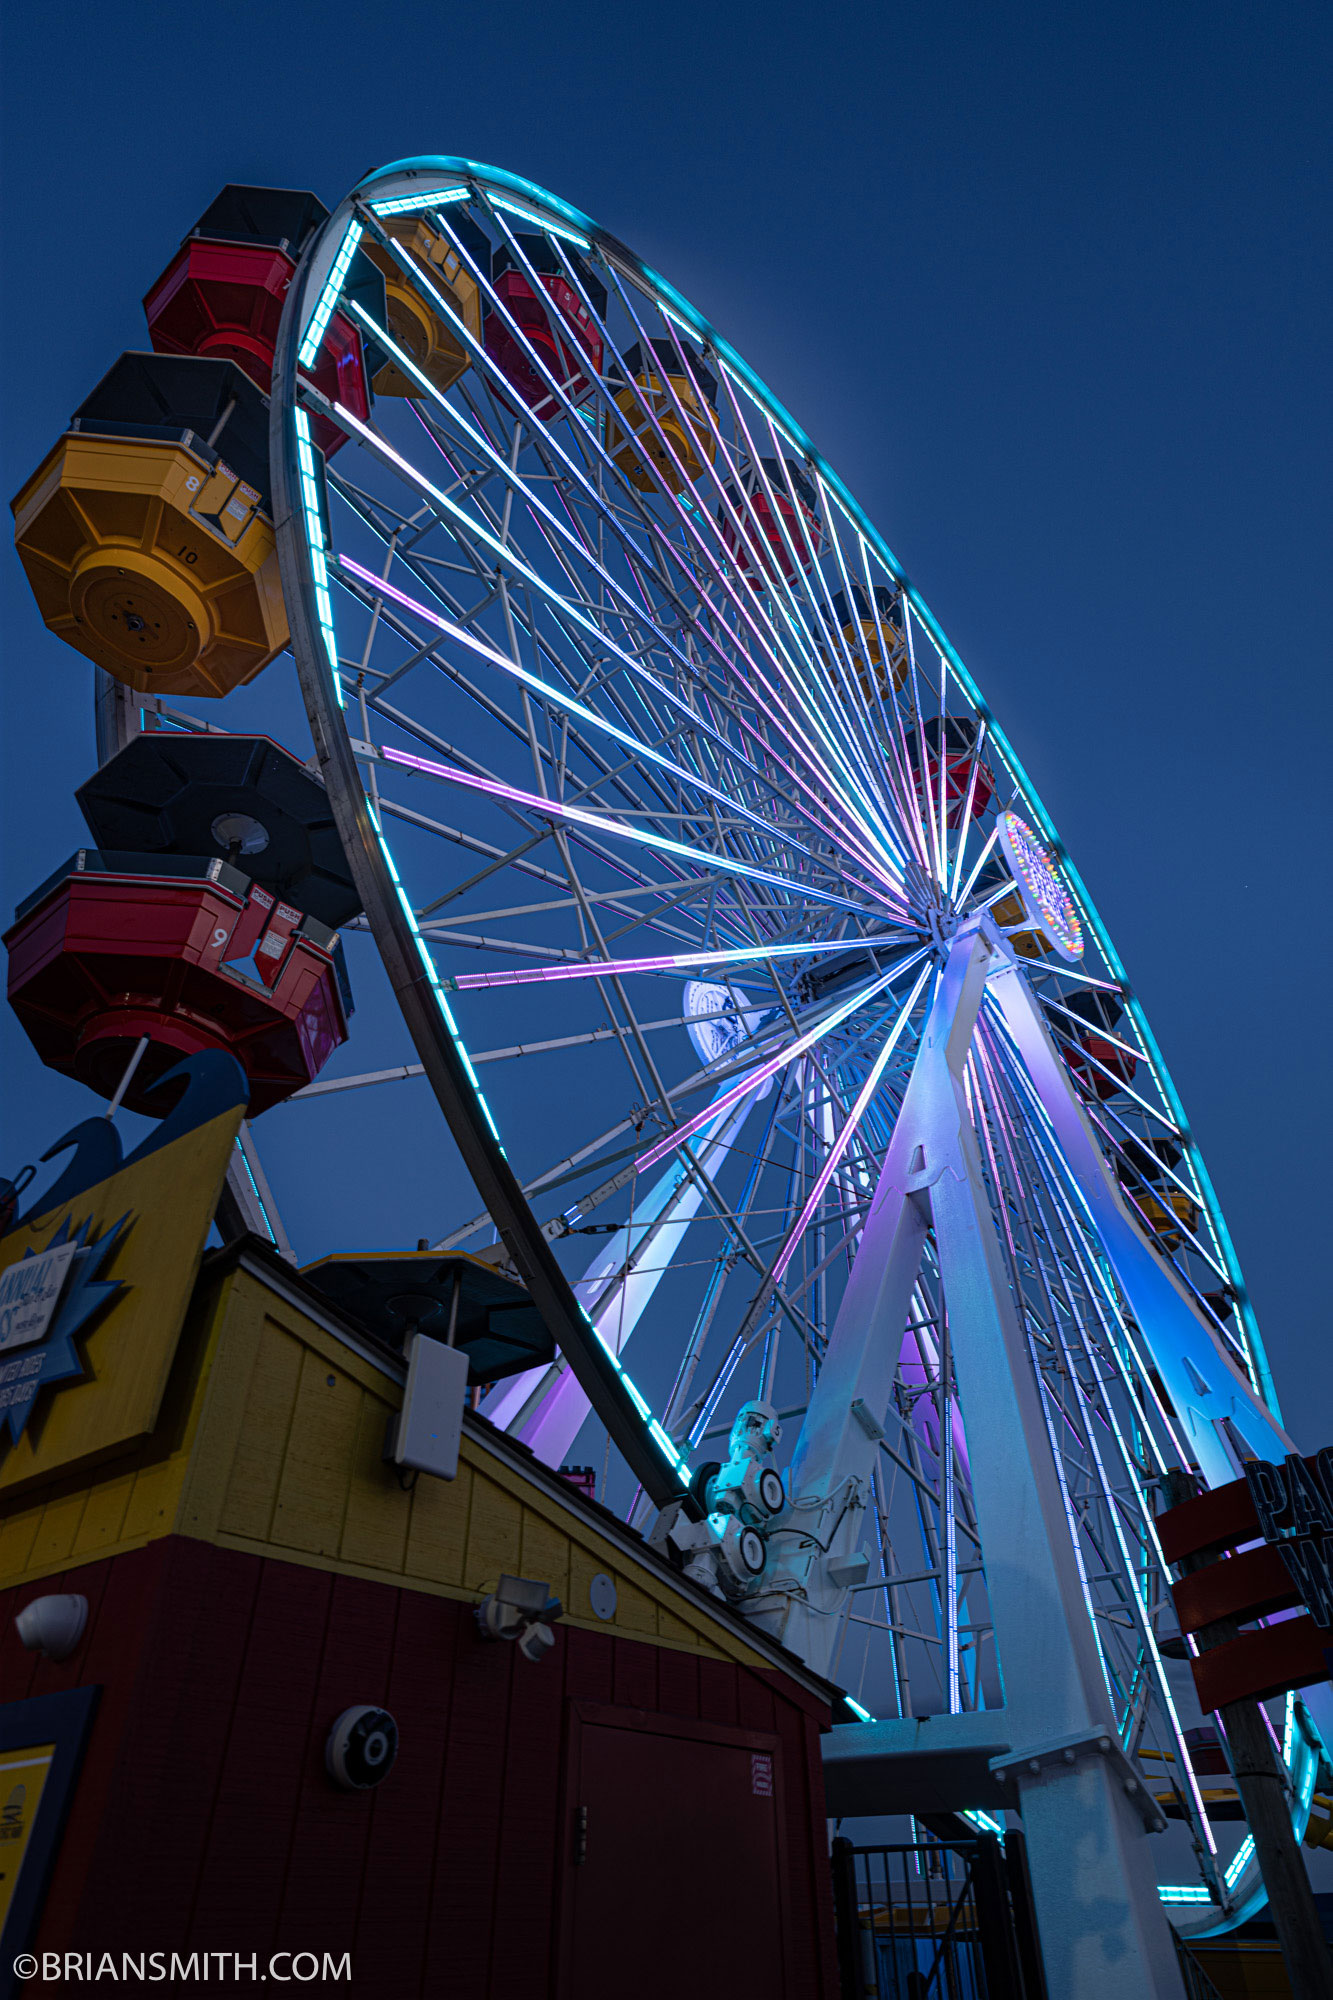 Santa Monica Pier at dusk photographed with Sony Alpha 1 and FE 35mm F1.4 GM lens